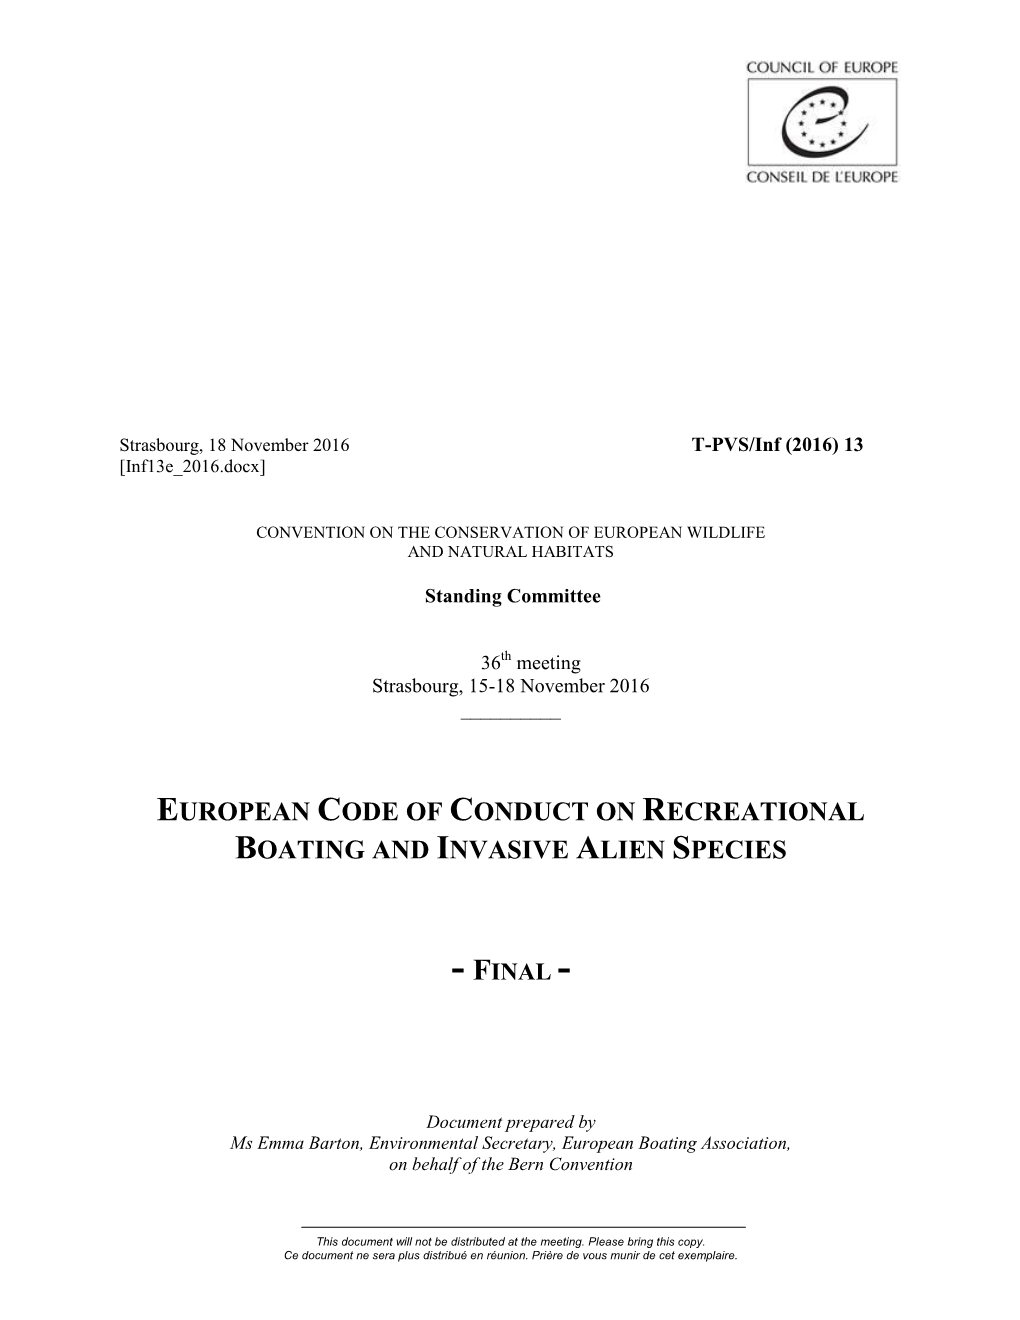 European Code of Conduct on Recreational Boating and Invasive Alien Species